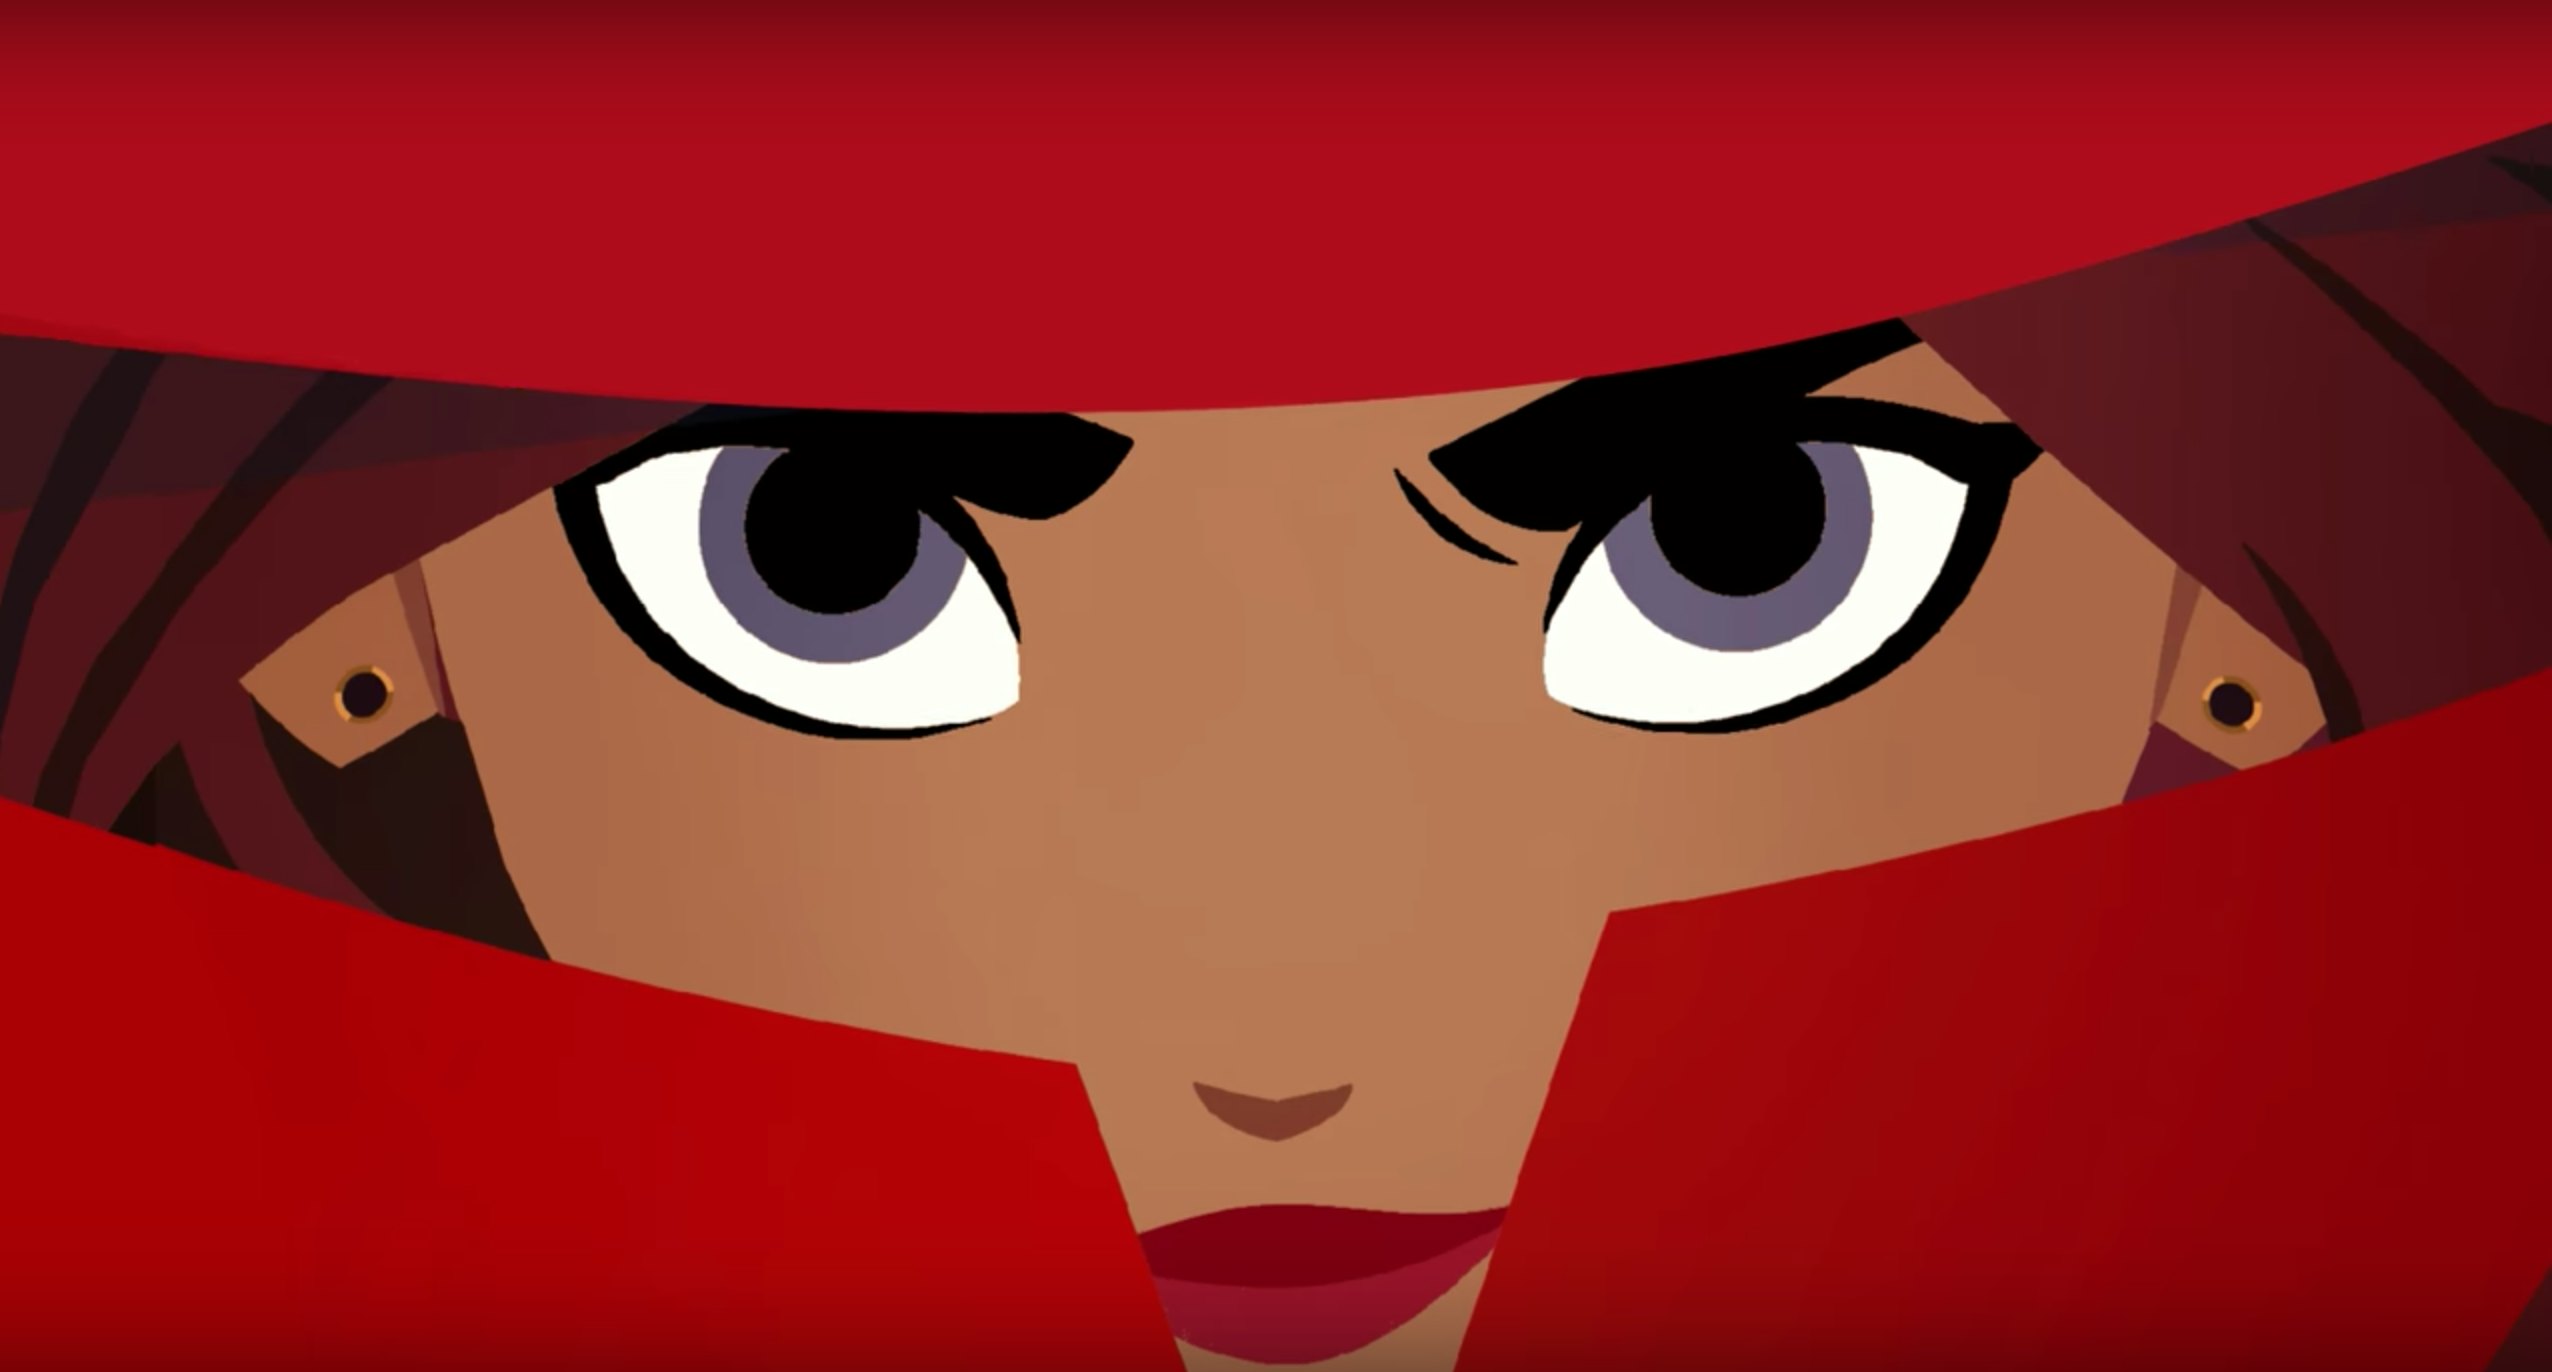 where on earth is carmen sandiego game online